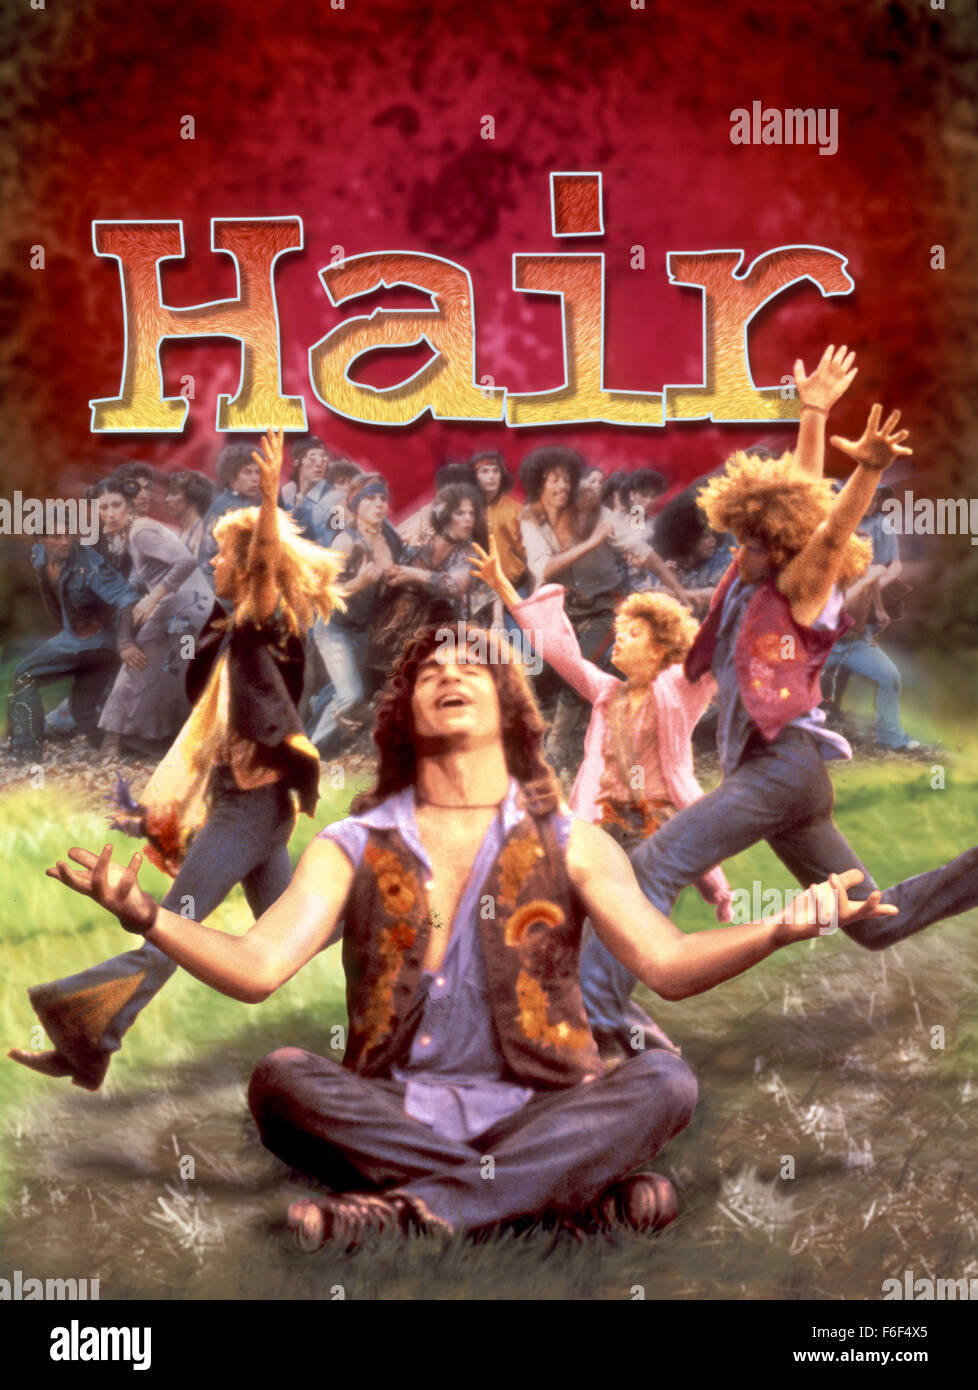 RELEASE DATE: March 14, 1979. MOVIE TITLE: Hair. STUDIO: CIP Filmproduktion  GmbH. PLOT: This movie, based on the cult Broadway musical of the 60s,  tells a story about Claude, a young man